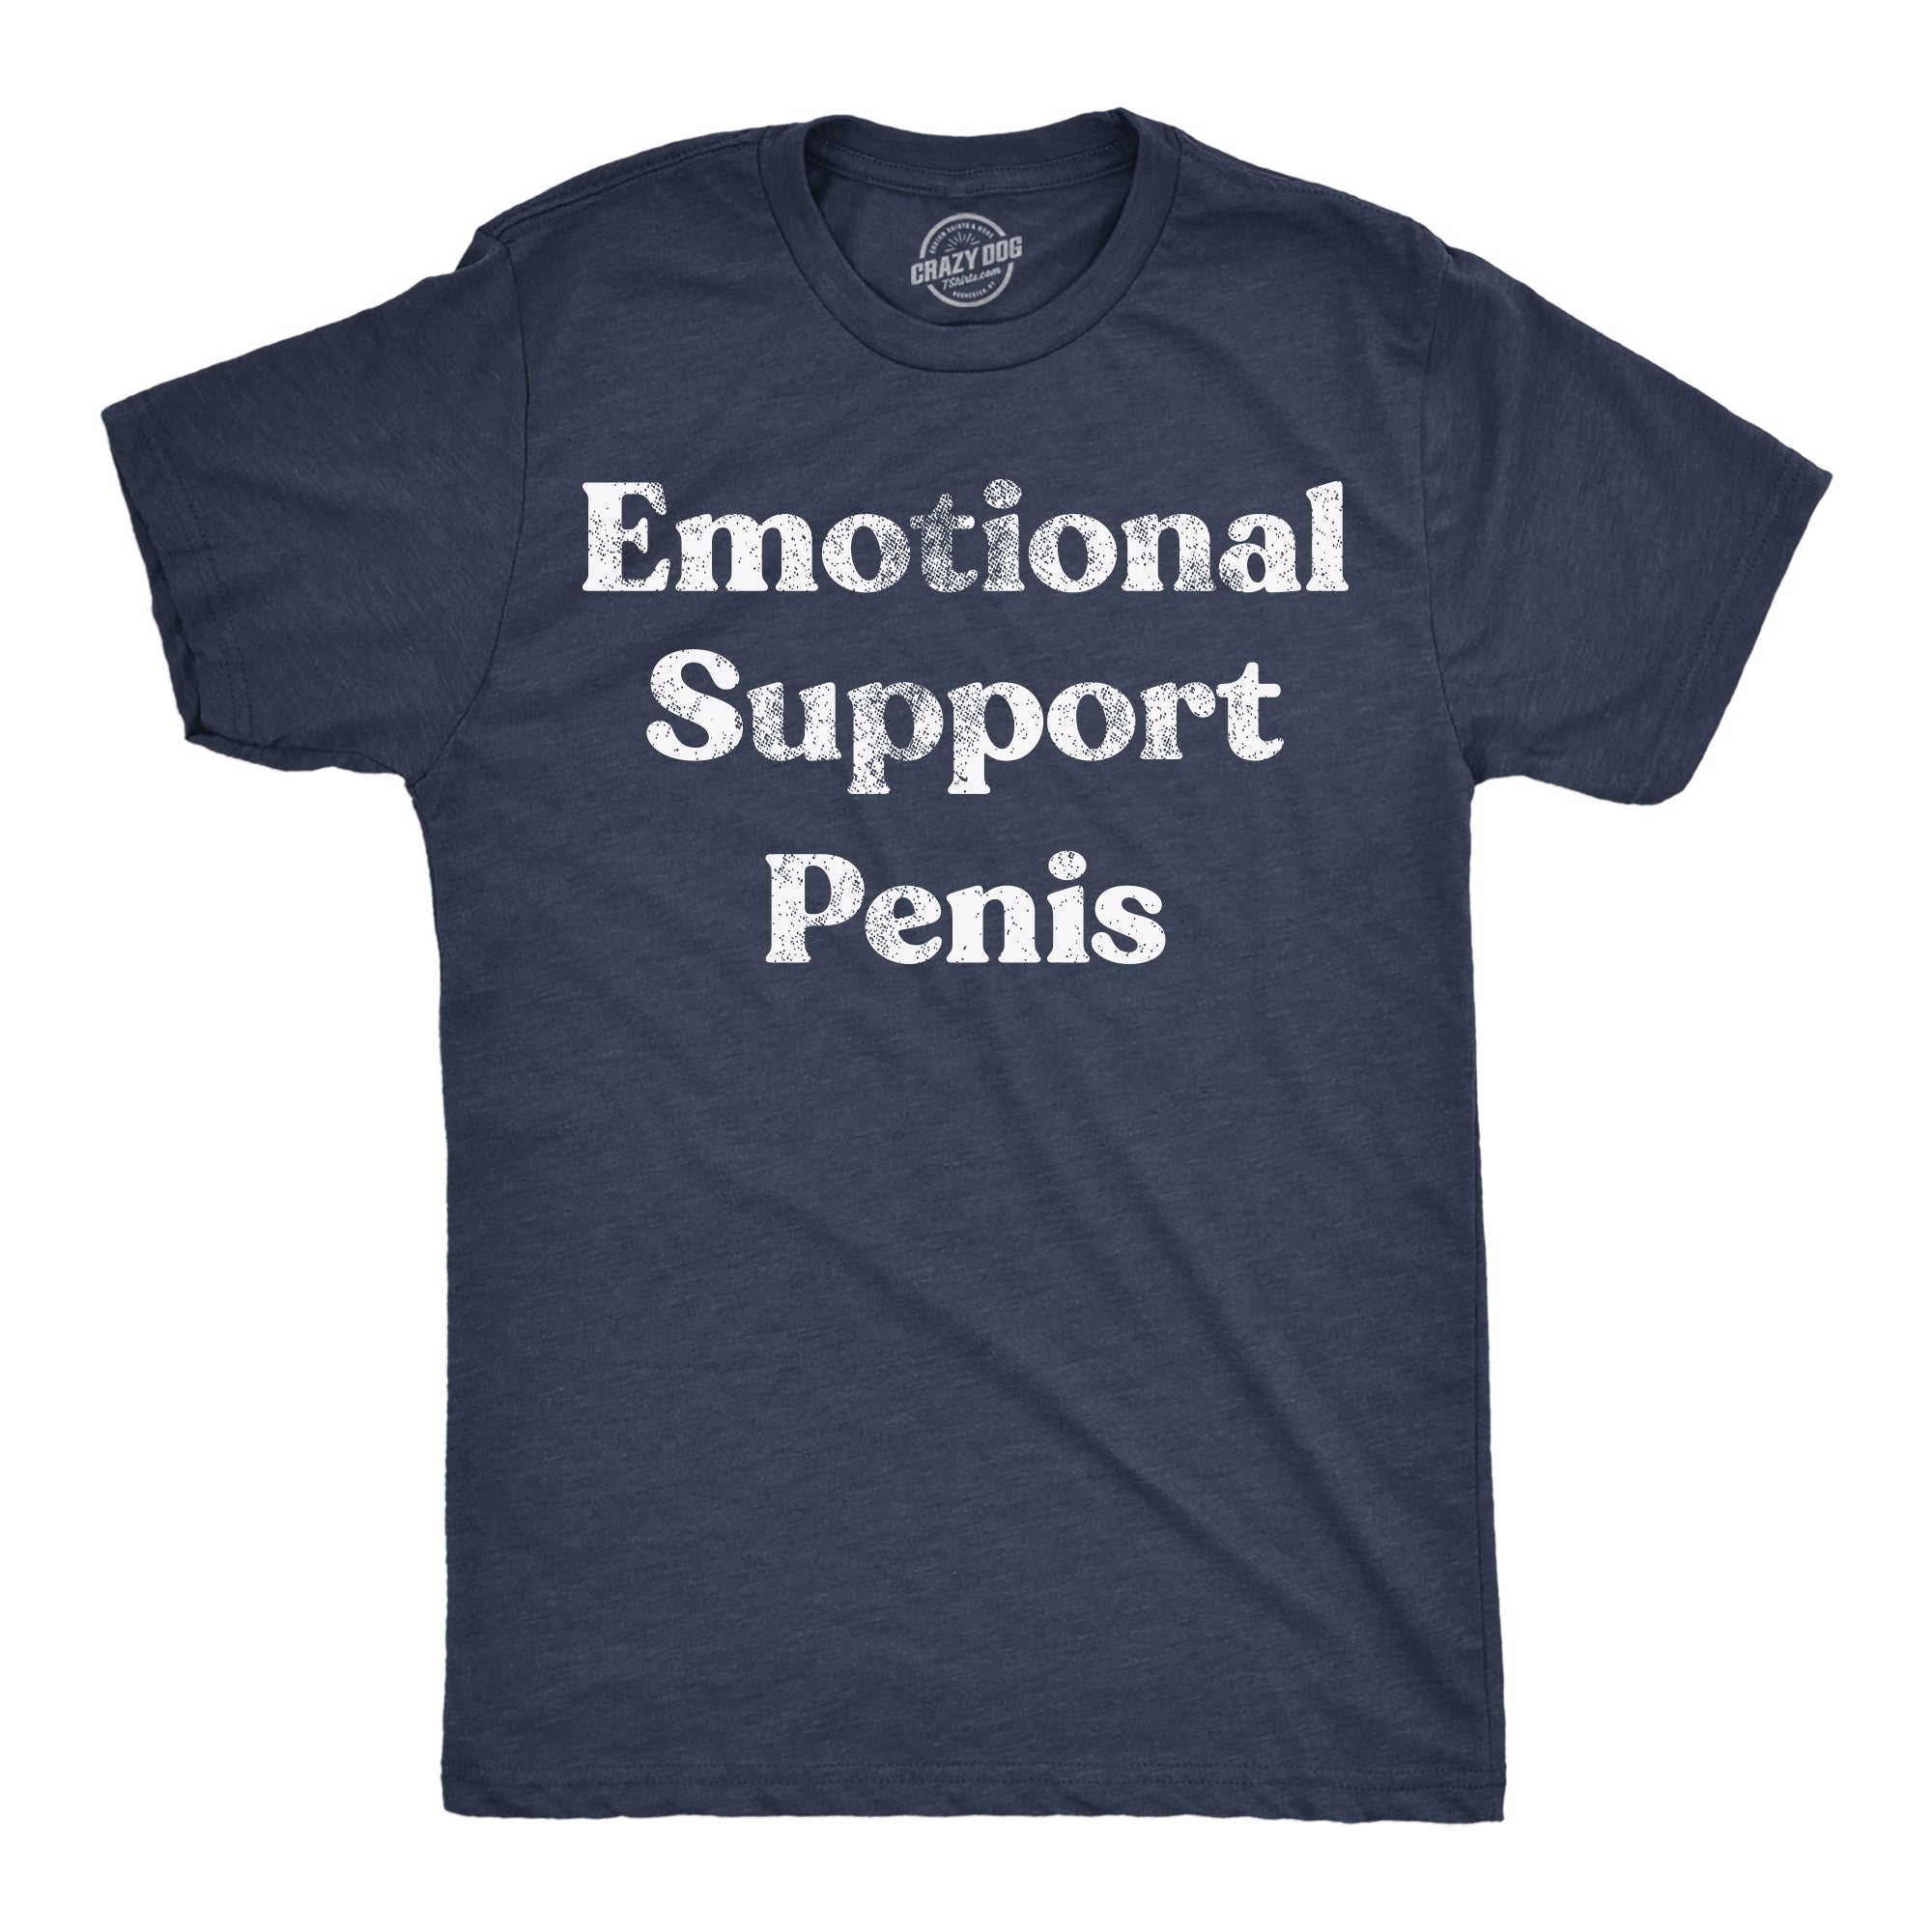 Funny Heather Navy - Emotional Support Penis Emotional Support Penis Mens T Shirt Nerdy sex sarcastic Tee